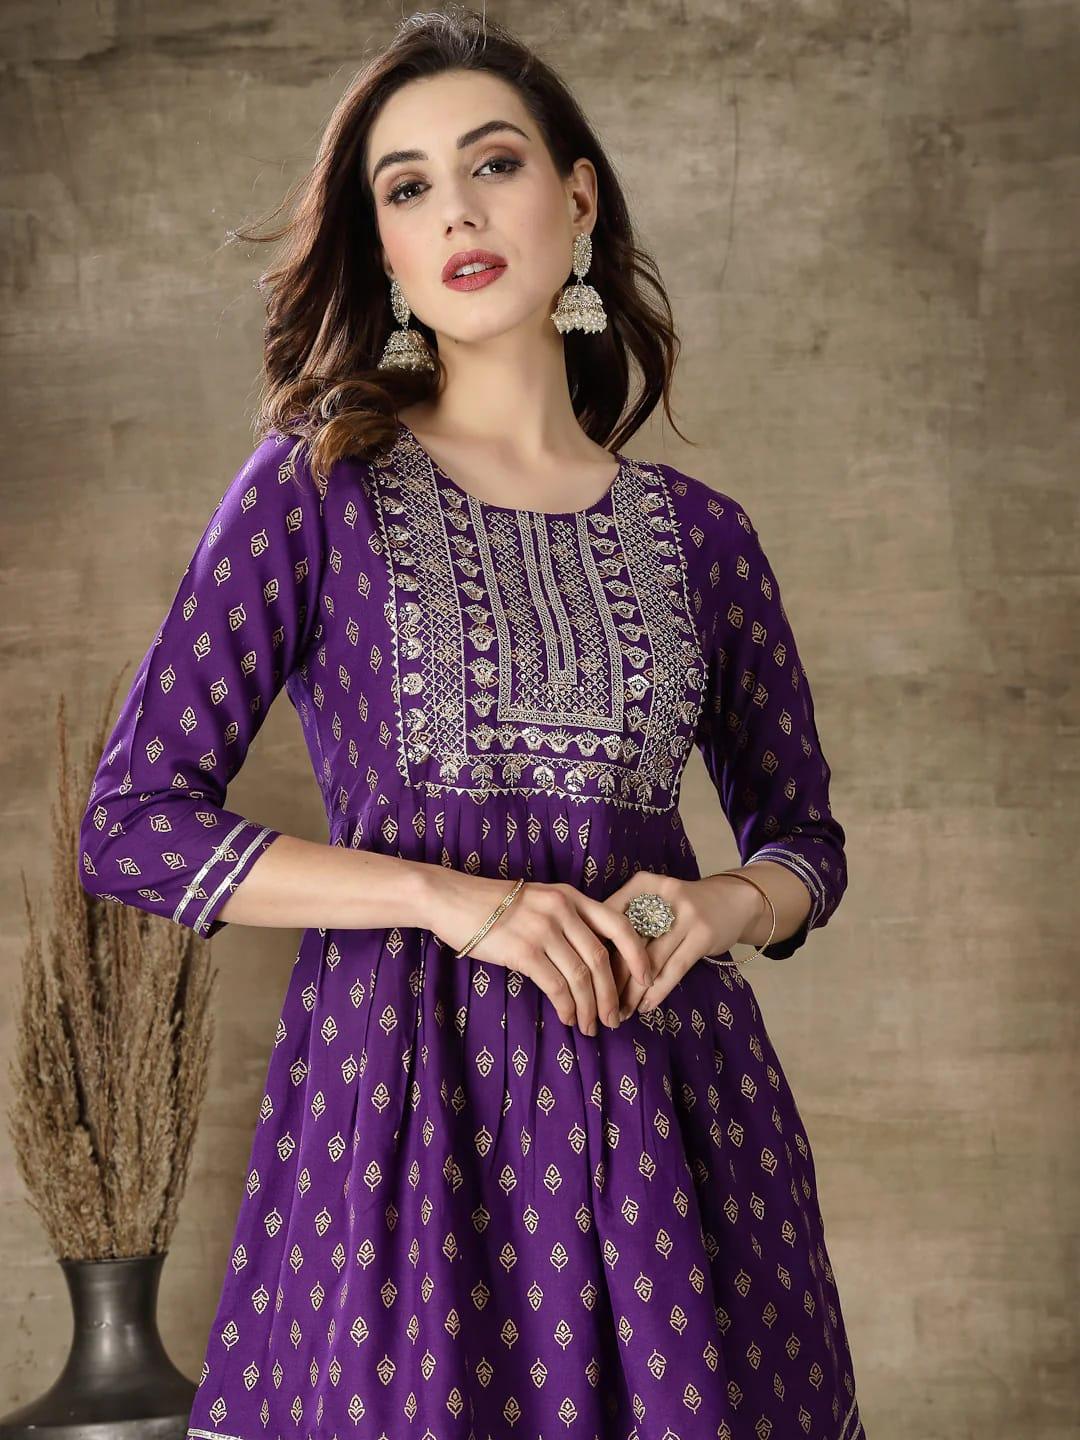 Violet ethnic motif gold printed kurti with embroidery - ShopeClub